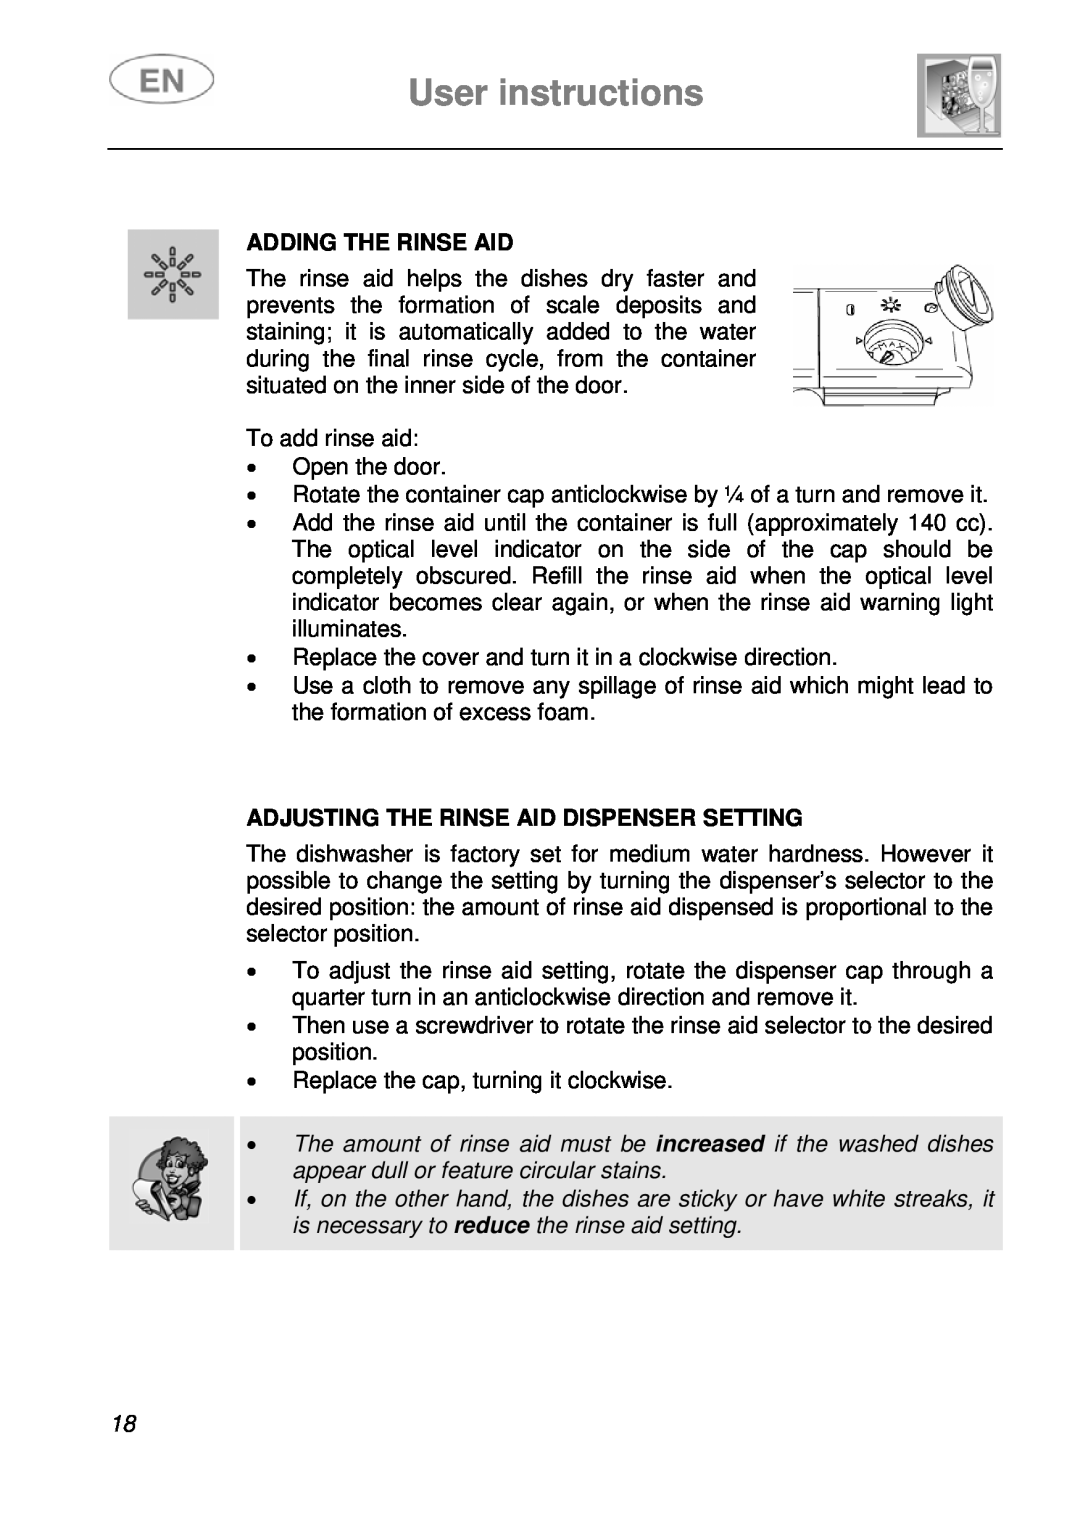 Smeg STA6246, STA6245 instruction manual User instructions, Adding The Rinse Aid, Adjusting The Rinse Aid Dispenser Setting 